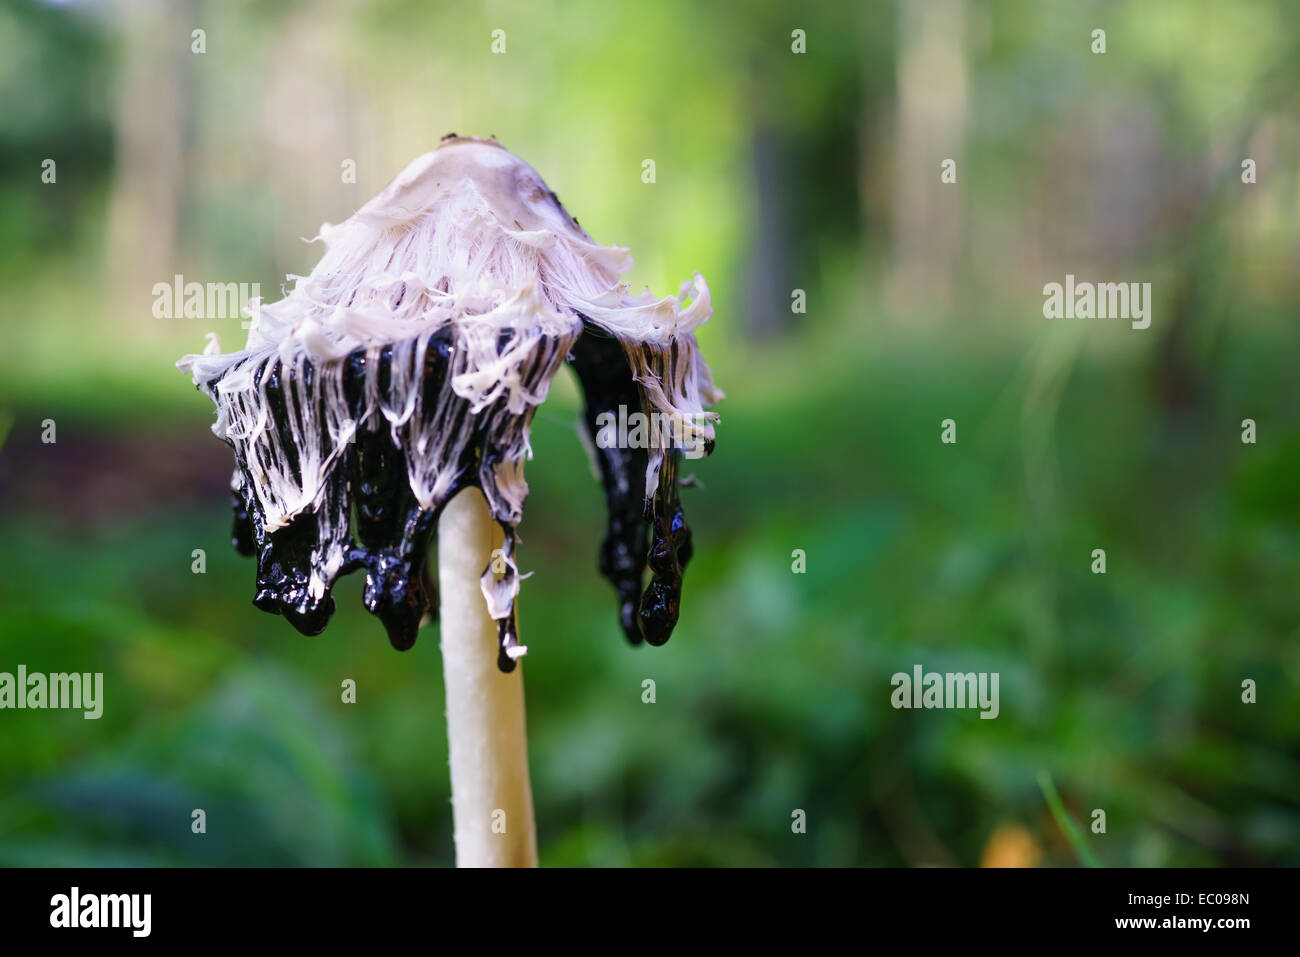 Shaggy ink cap mushroom (Coprinus comatus), also known as lawyer's wig, in a wood in Scotland. Stock Photo